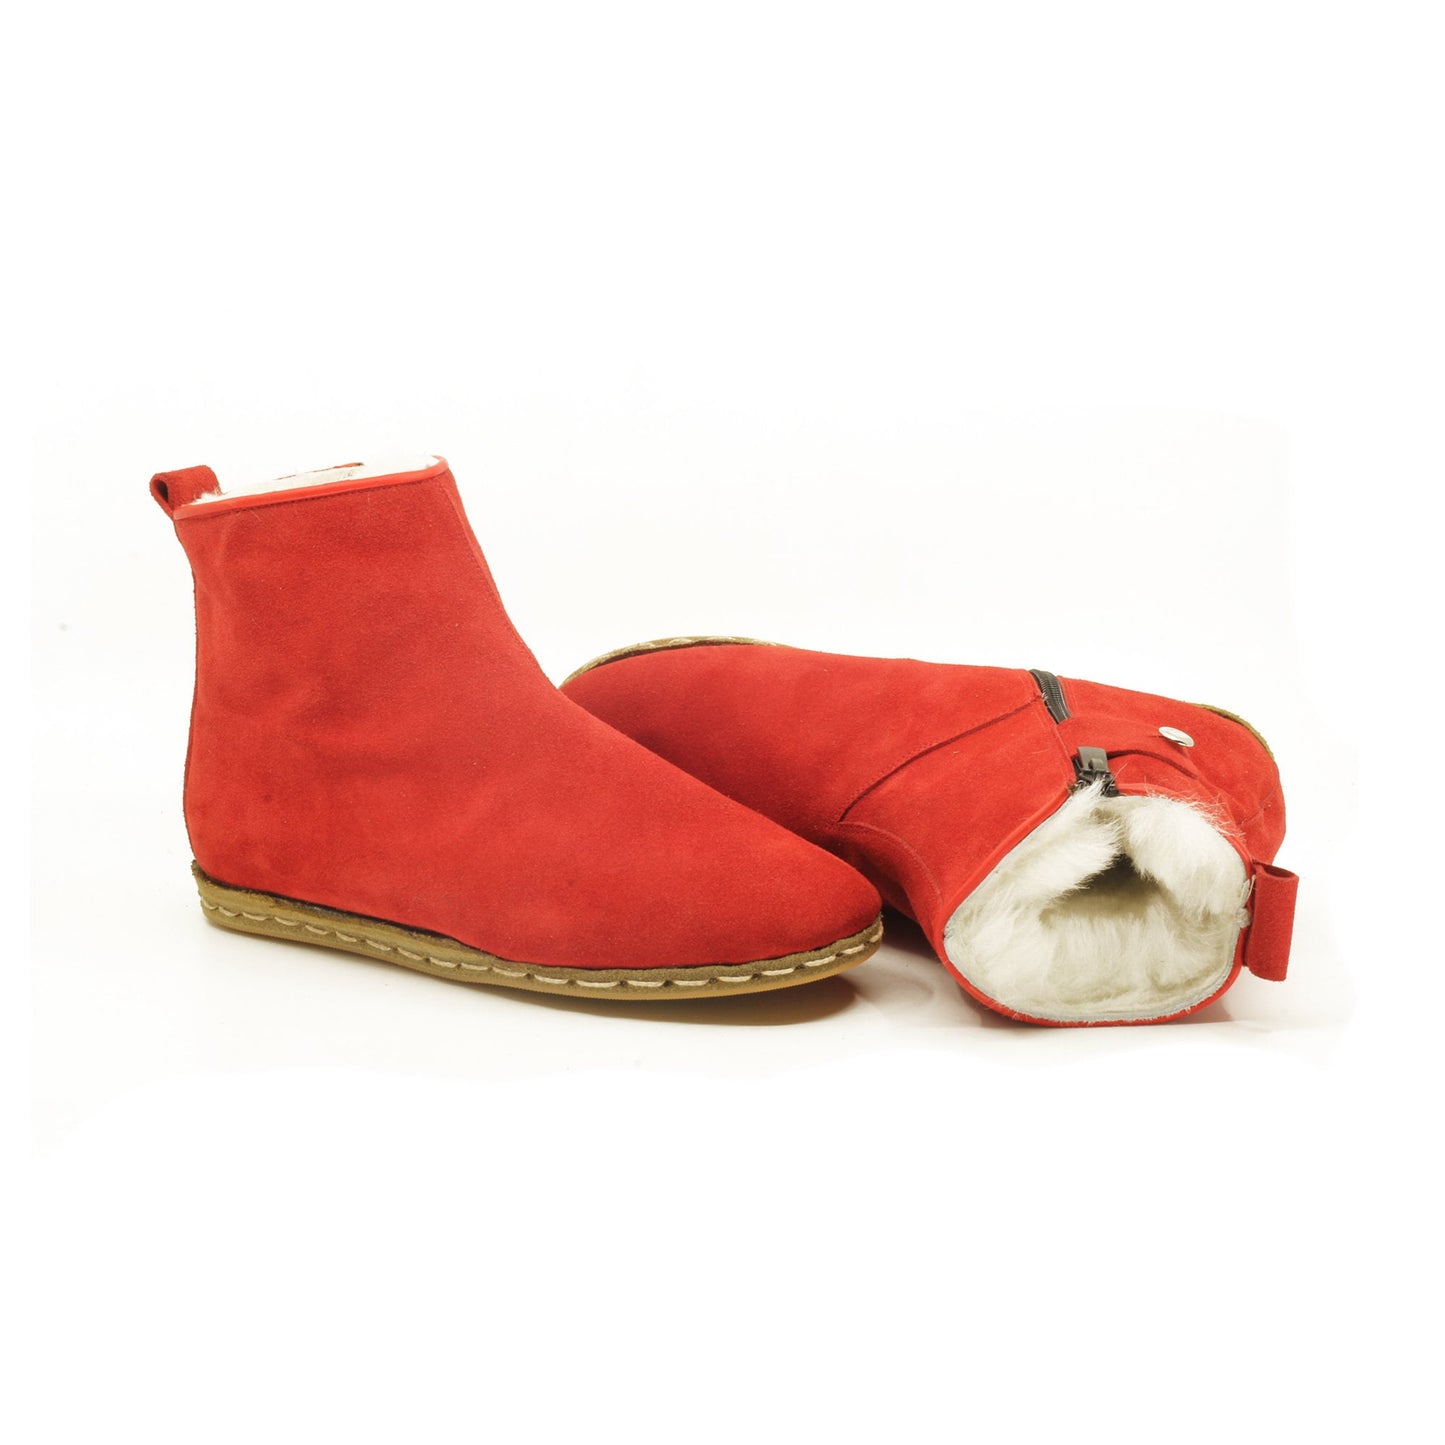 boots for rainless days, tuscan lth a silky toamb fur leather boots wiuch